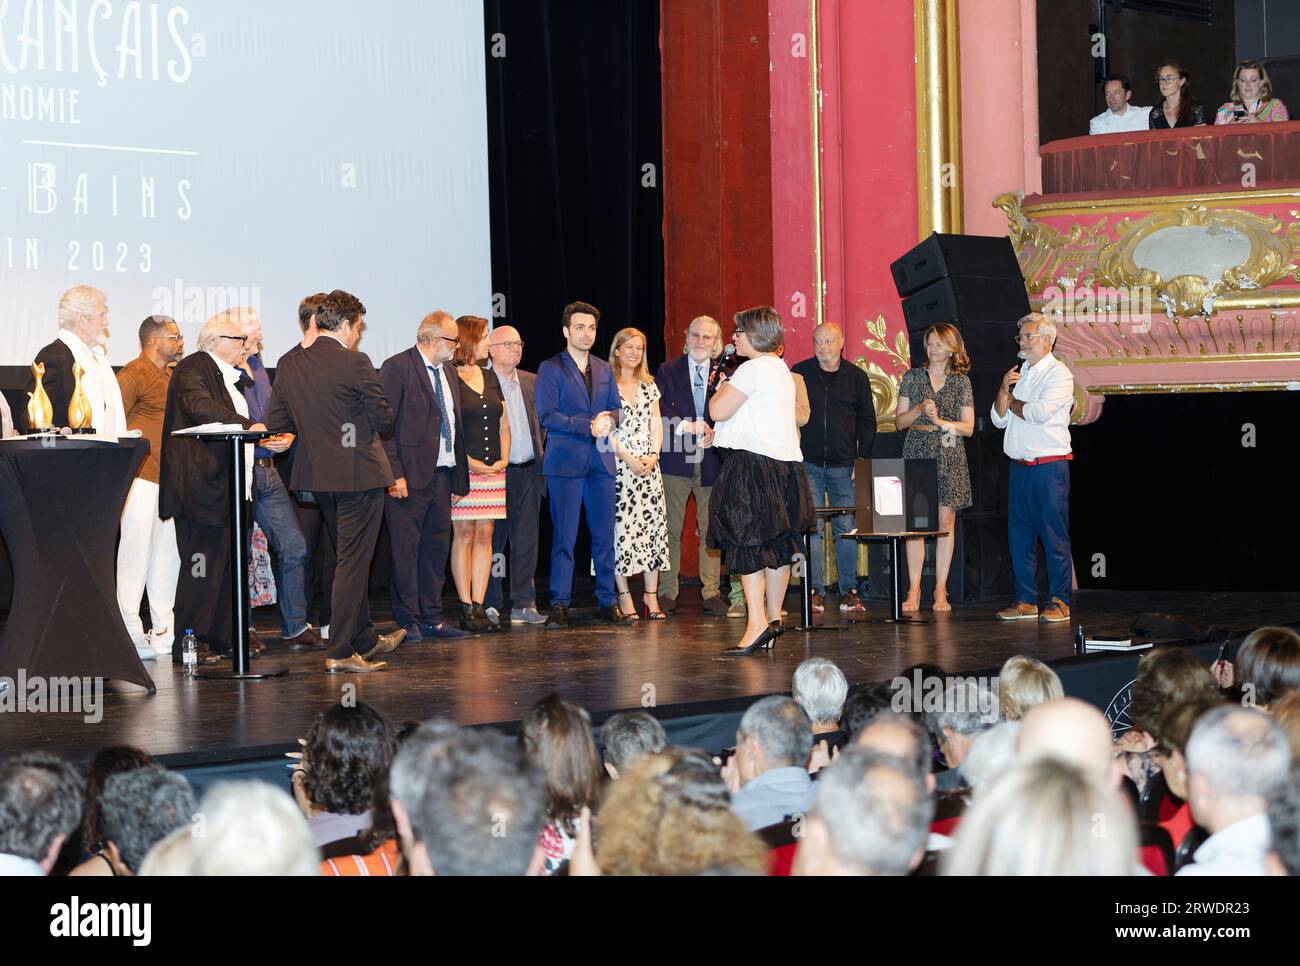 Aix-Les-Bains, France.10th June, 2023. Closing of the Film and Gastronomy Festival in the Grand Cercle Casino Theater in Aix-Les-Bains, France Stock Photo